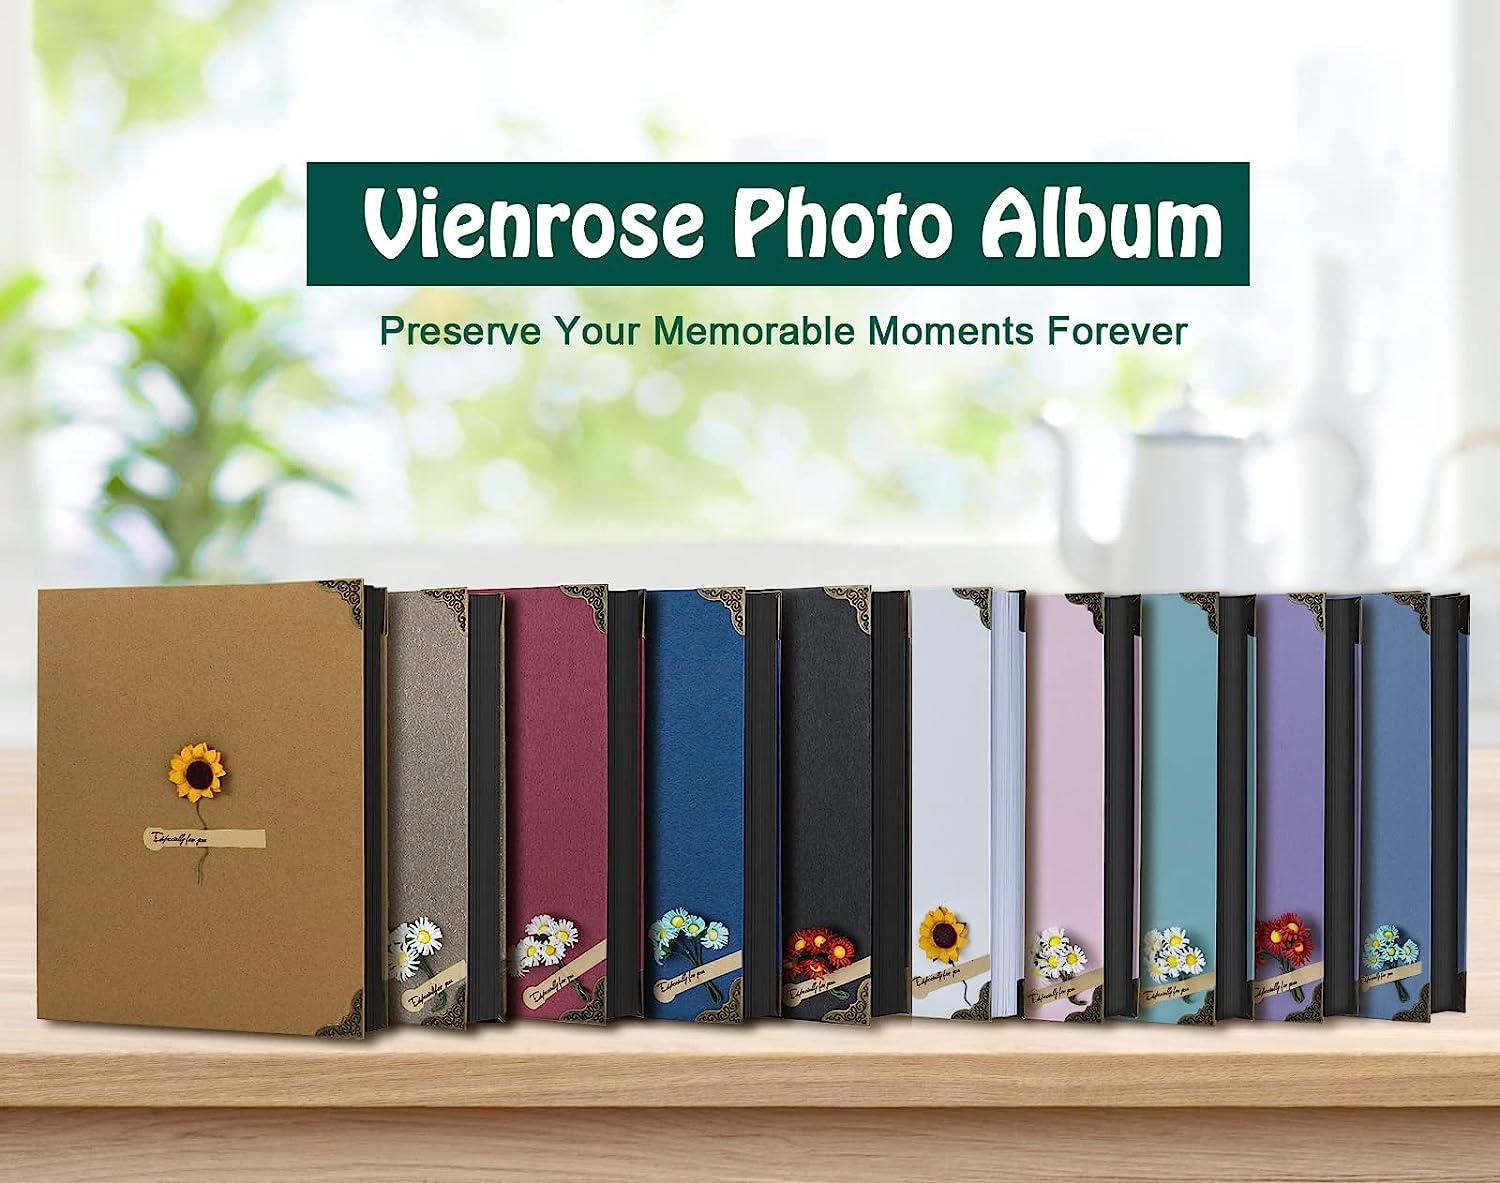 Vienrose Photo Album Scrapbook 60 Pages Hardcover 8.5 x 11 Inch with DIY  Scrapbooking Kit 3 Rings White Paper Scrapbook for Lover Friends Kids  Anniversary Wedding Gift 8.5'' x 11'' White